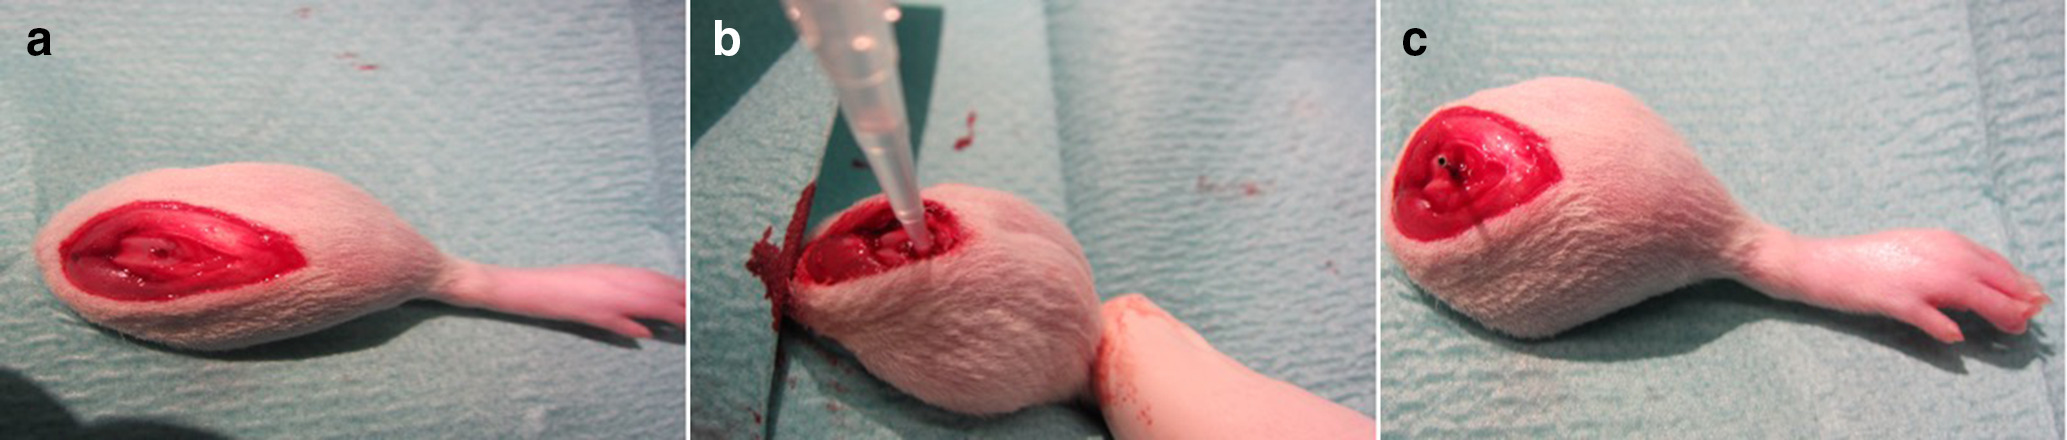 Fig. 1 
          a) Drill hole in distal femur. b) Methicillin-resistant Staphylococcus aureus injection into drilled femur. c) Implanted sterile steel implants into rat femur.
        